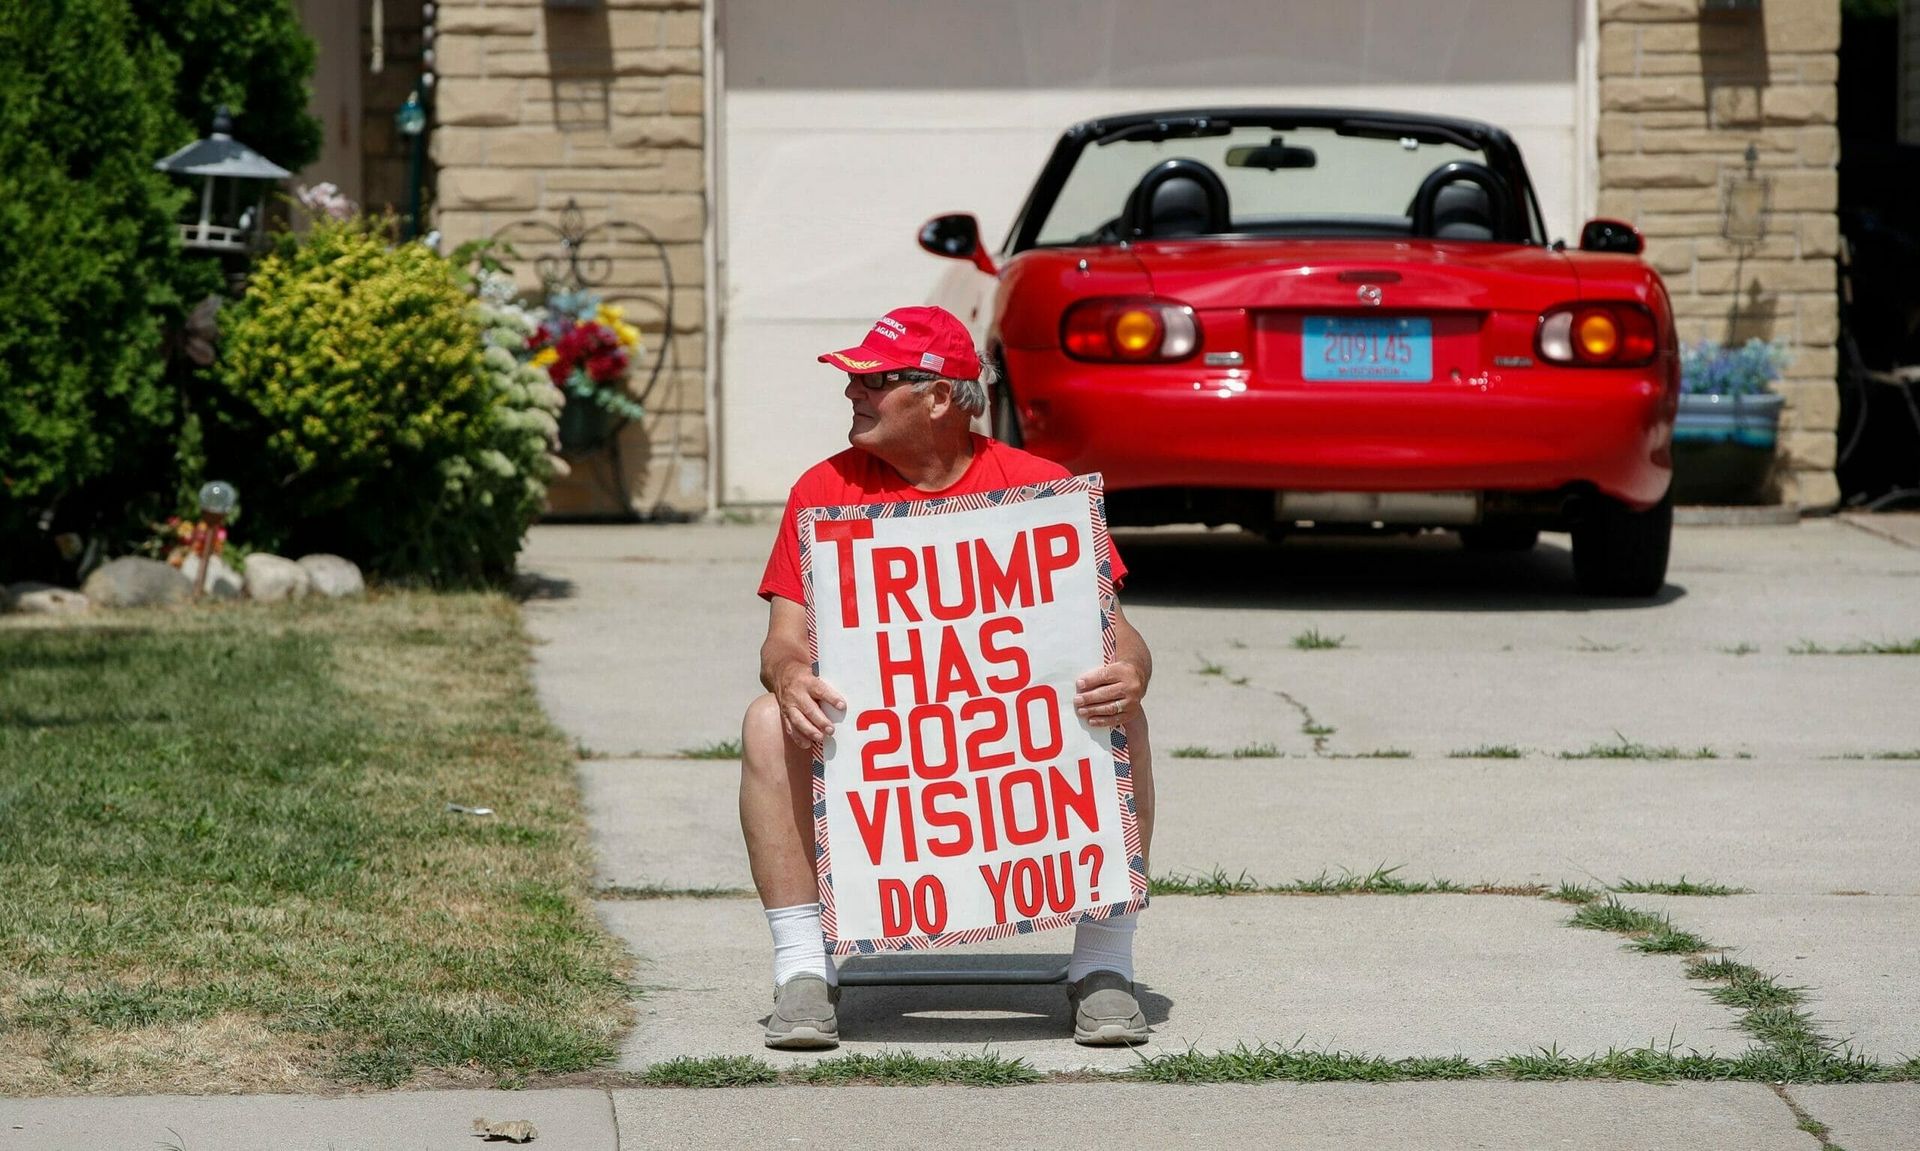 A Donald Trump supporter holds a poster before a rally with the U.S. President in Oshkosh, Wisconsin, on August 17, 2020.  (KAMIL KRZACZYNSKI/AFP via Getty Images)